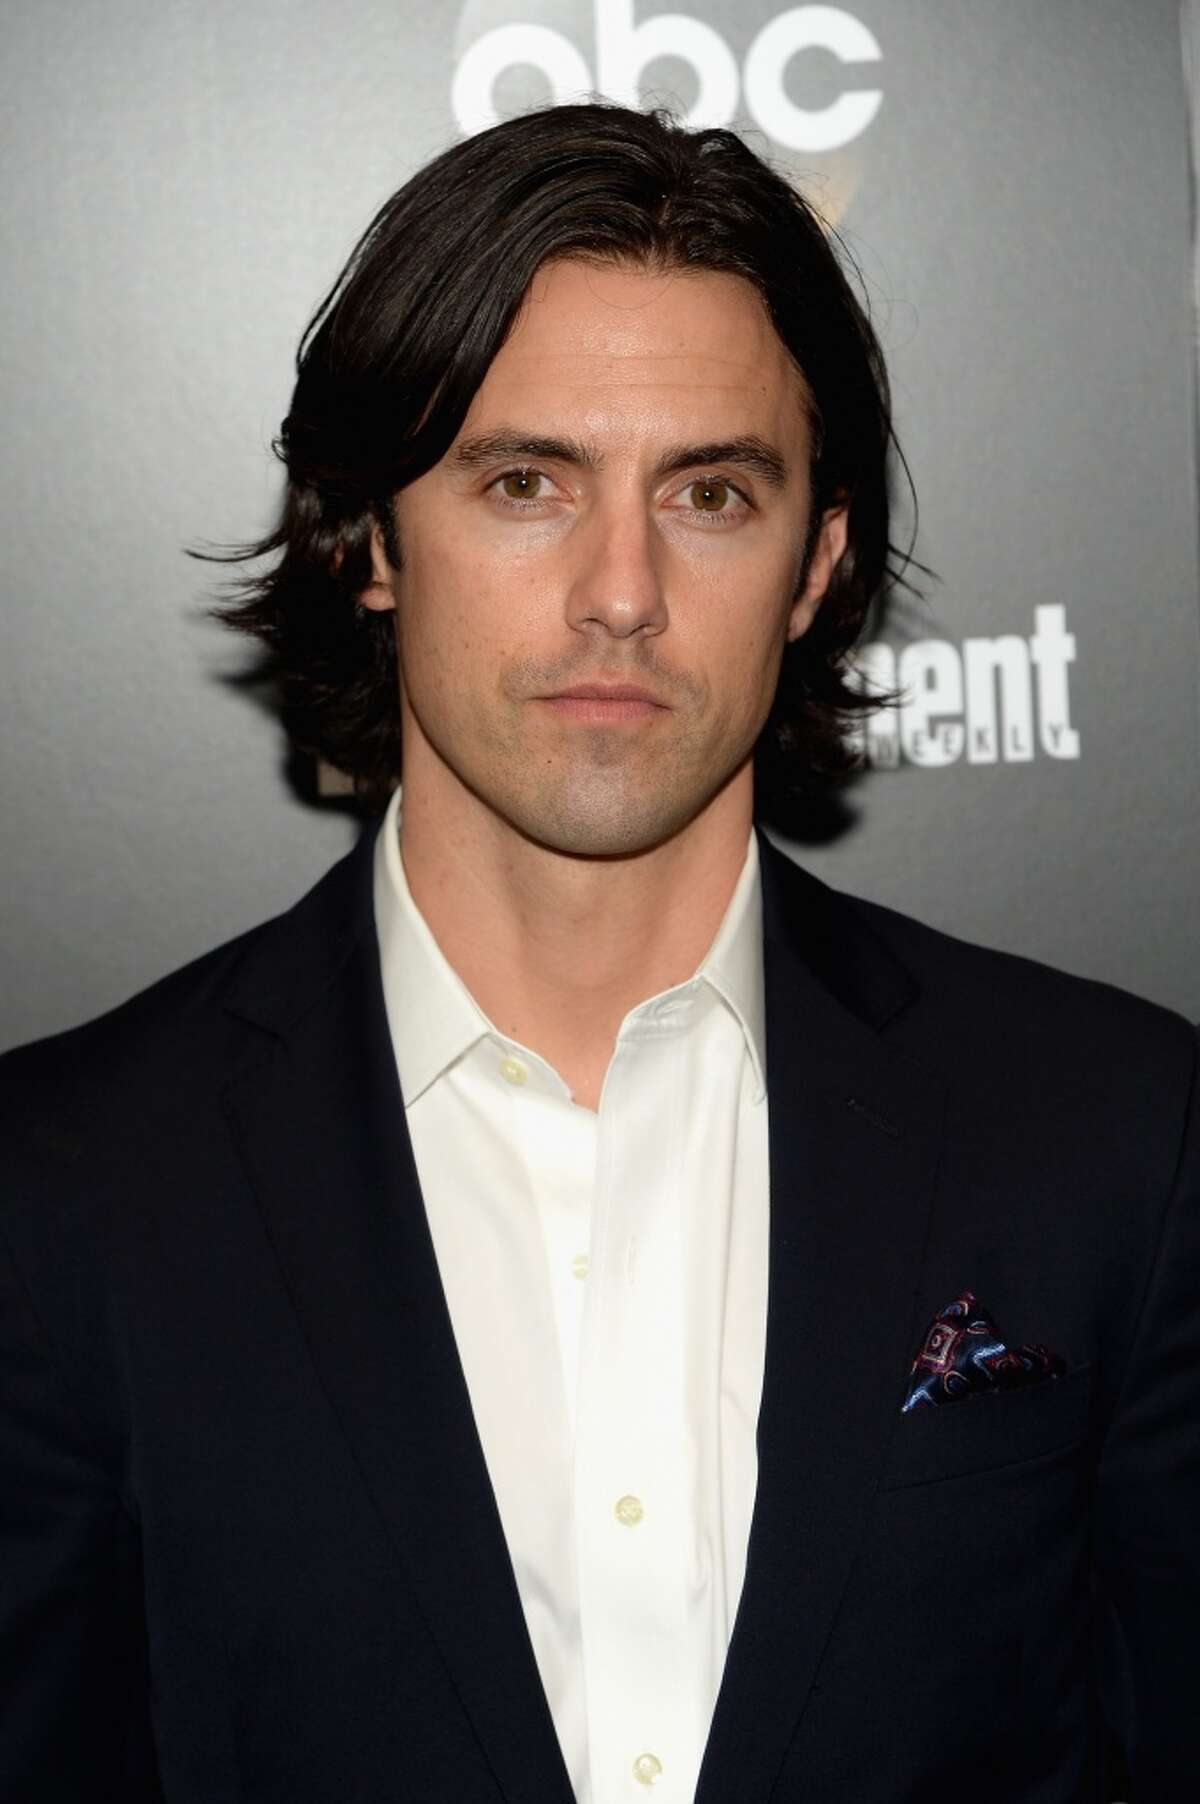 9) MILO: Milo Ventimiglia who starred in "Heroes" might be the best known actor who carries this name.